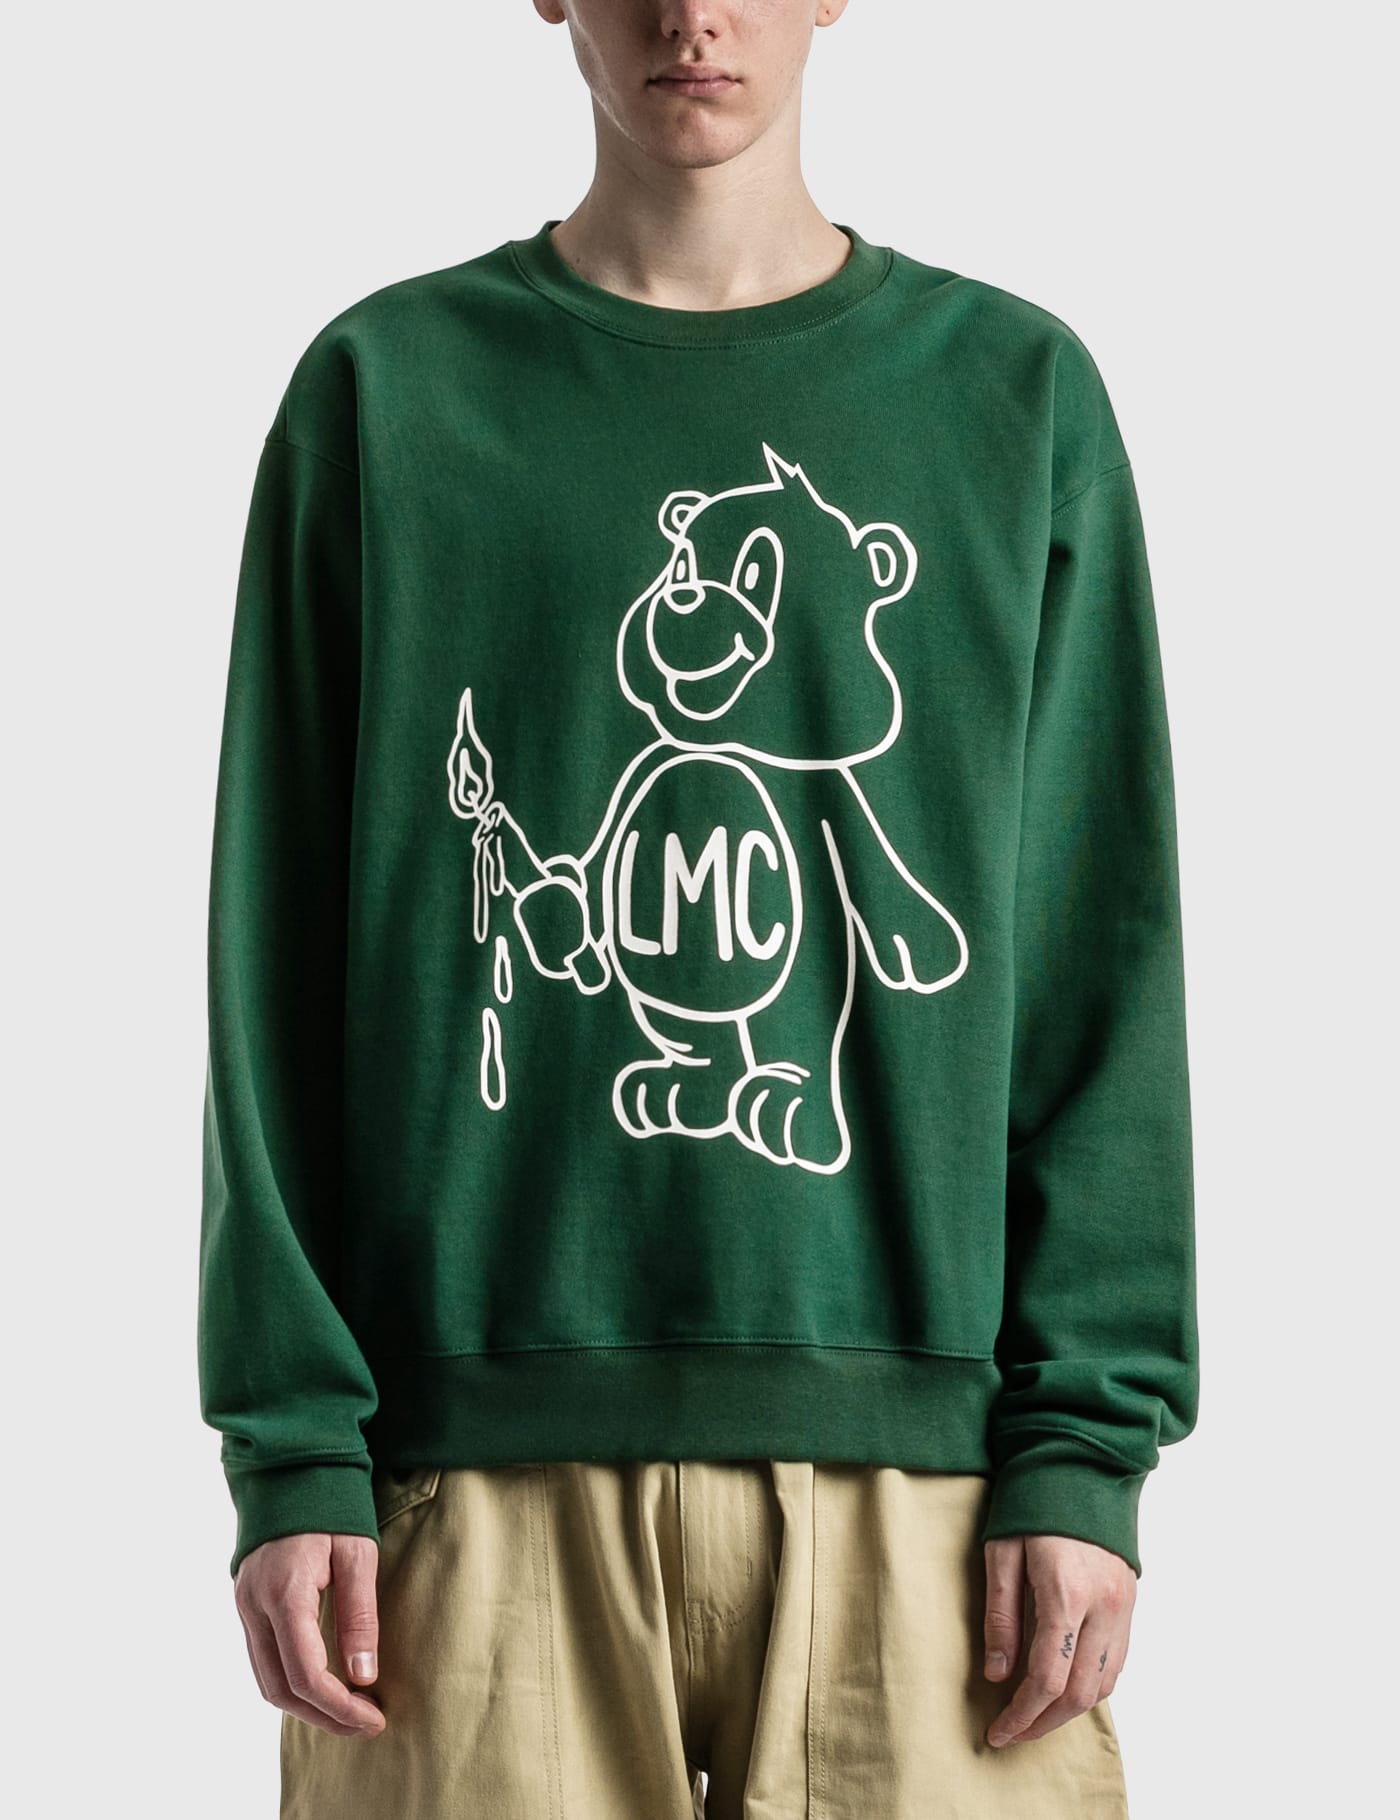 LMC - Candle Bear Sweatshirt | HBX - Globally Curated Fashion and Lifestyle  by Hypebeast